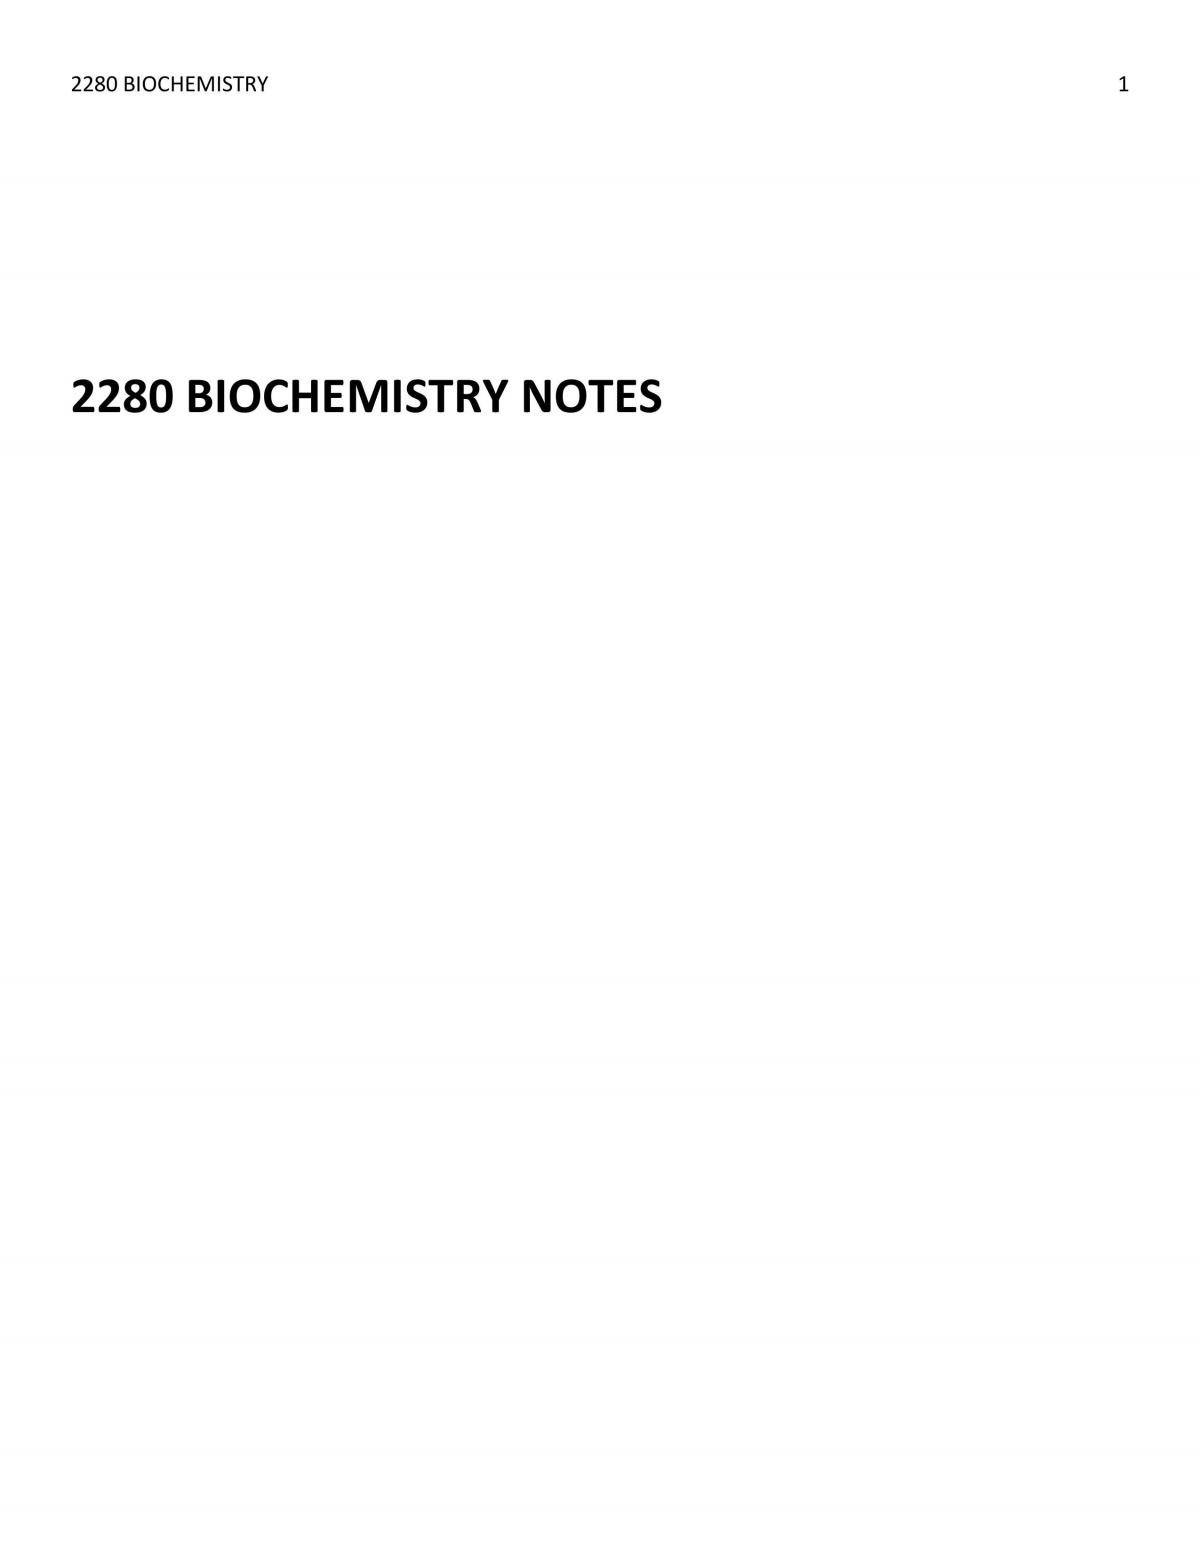 Complete 2280 Biochemistry Notes - Page 1